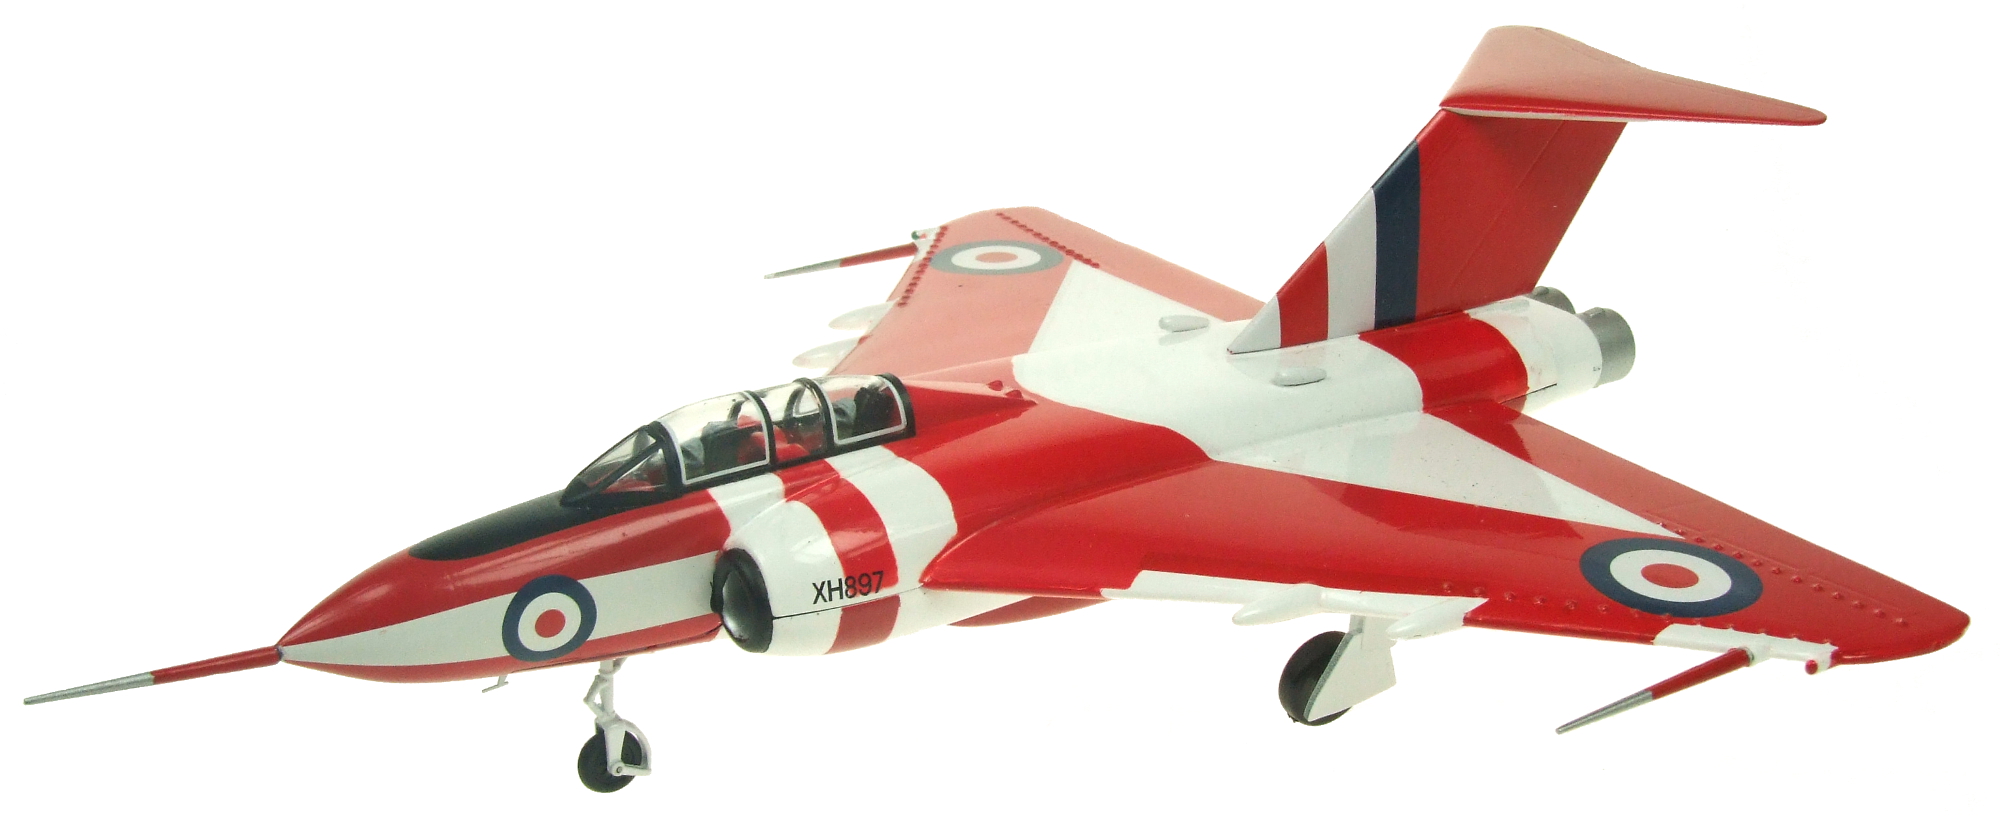 Gloster Javelin FAW 4 FAW 9 XH897 Preserved Duxford (1:72) - Preorder item, order now for future delivery